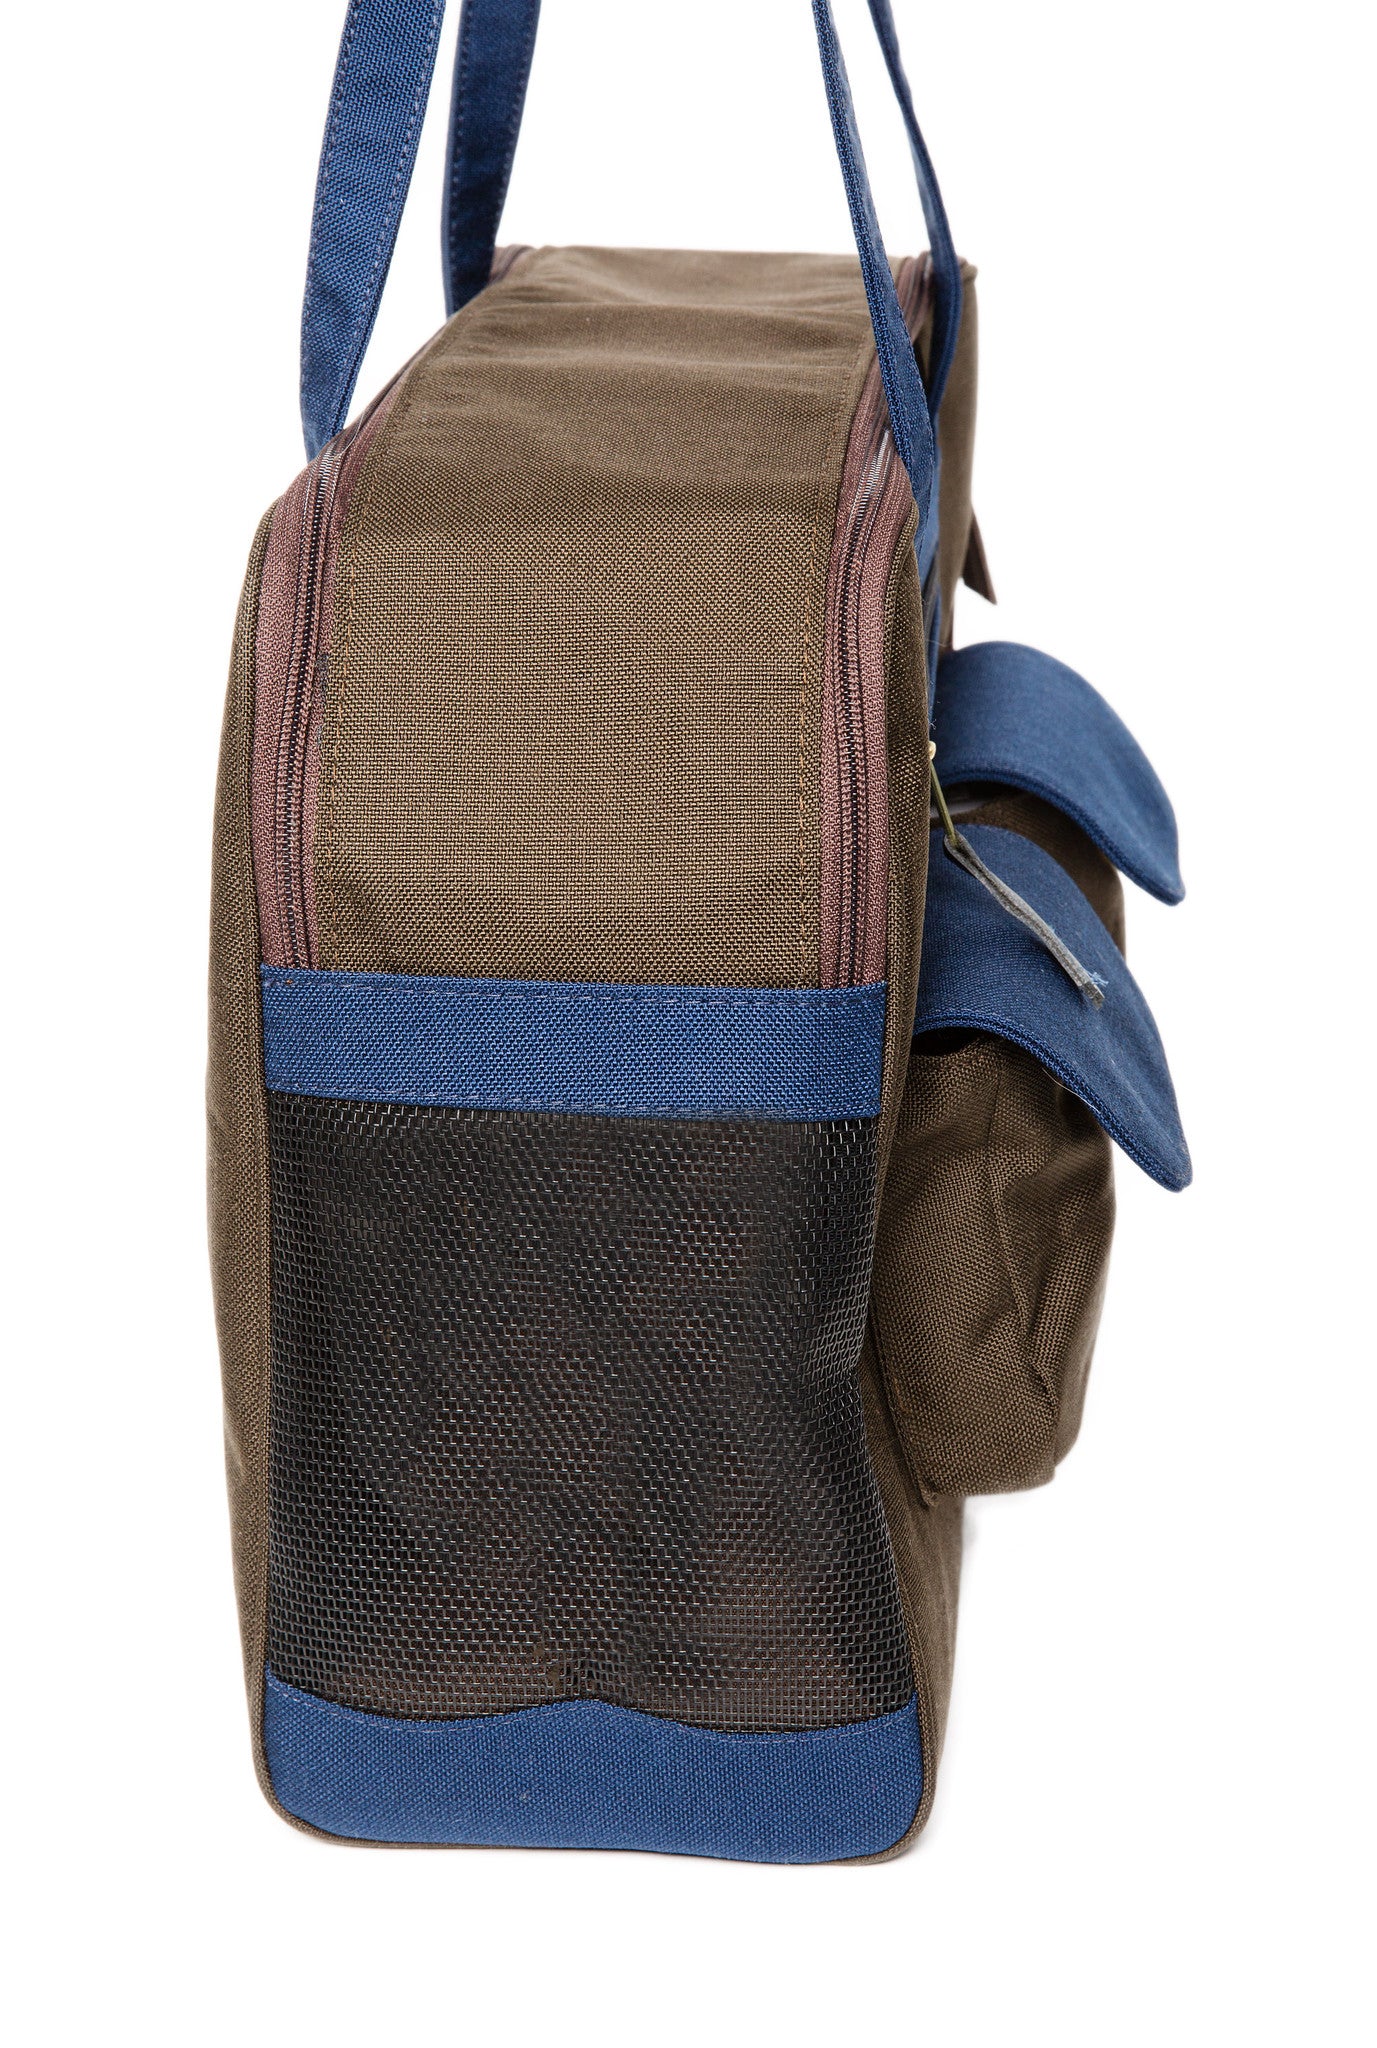 Dog Carrier - Winter - Chocolate Canvas, Colored Canvas Trim, 2 Colors